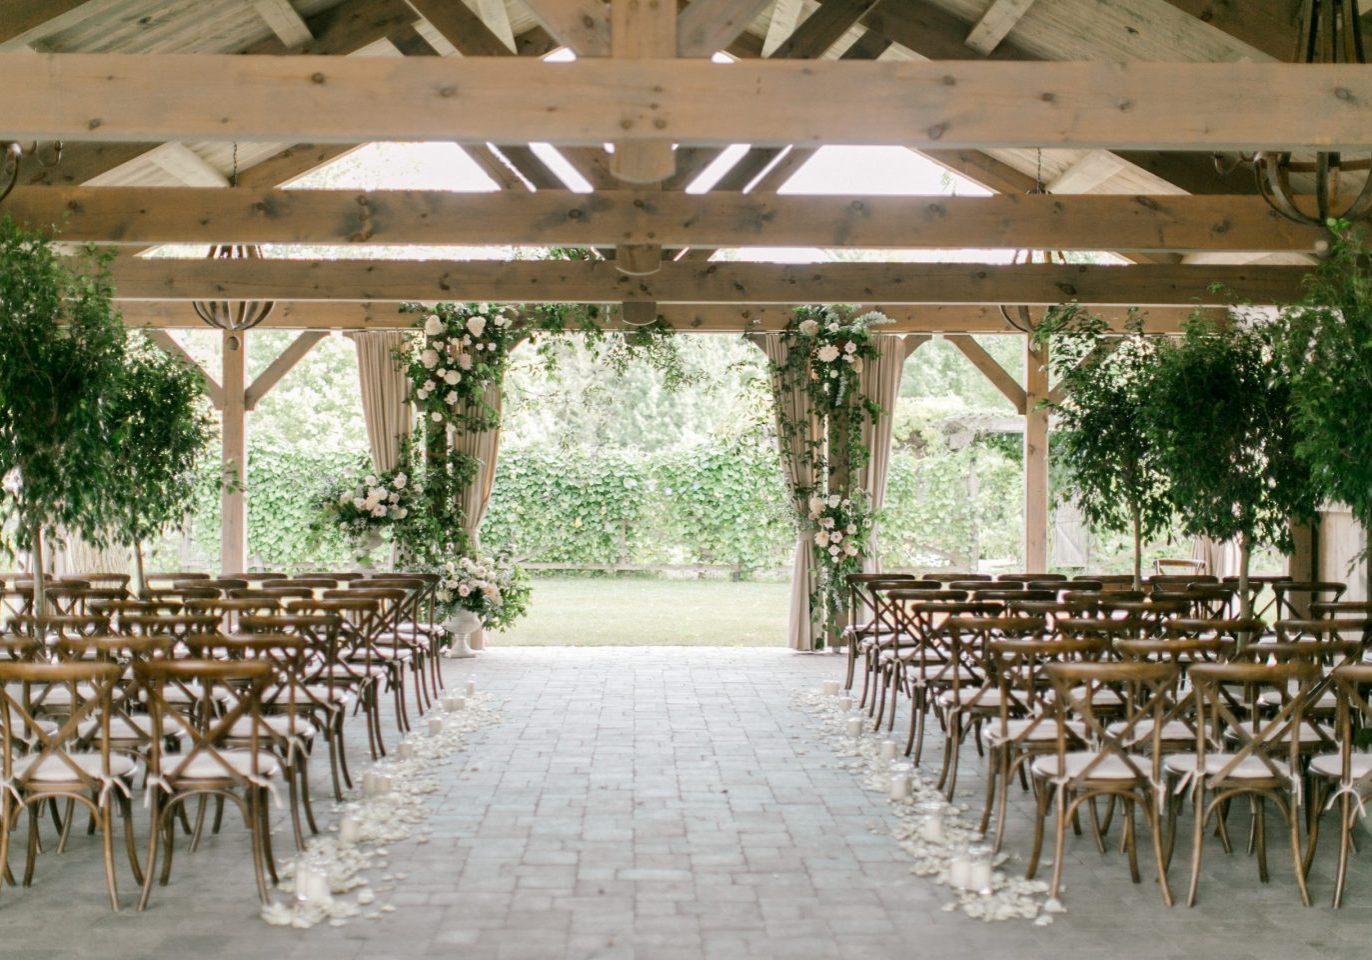 Firshade Room & Summer House outdoor space decorated for wedding